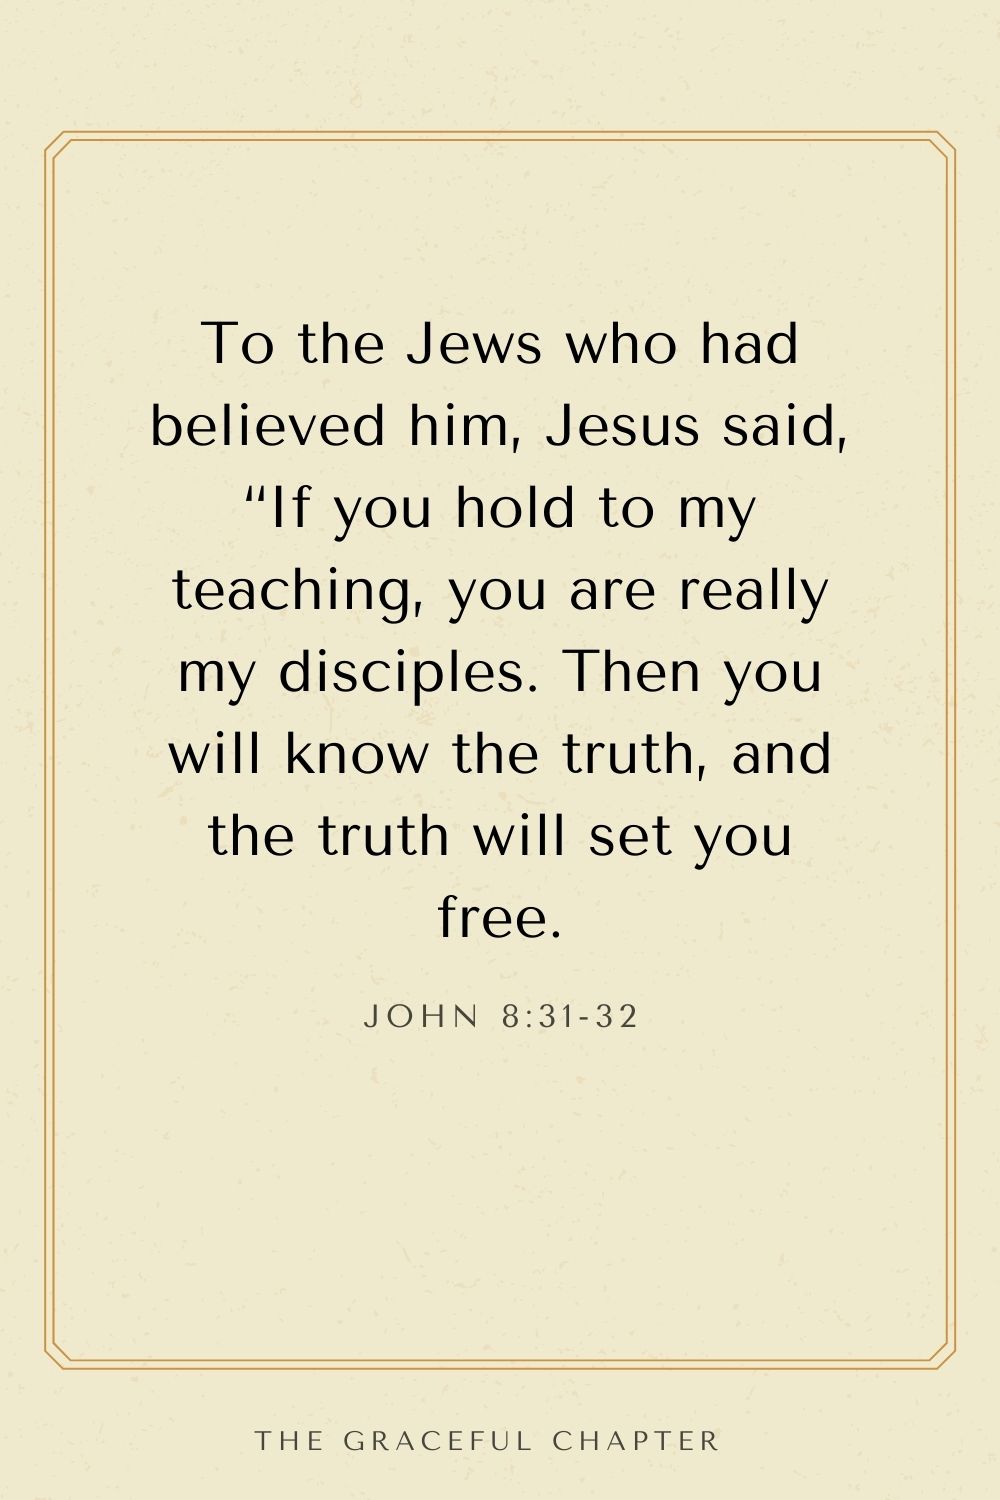 breakthrough bible verses- To the Jews who had believed him, Jesus said, “If you hold to my teaching, you are really my disciples. Then you will know the truth, and the truth will set you free. John 8:31-32